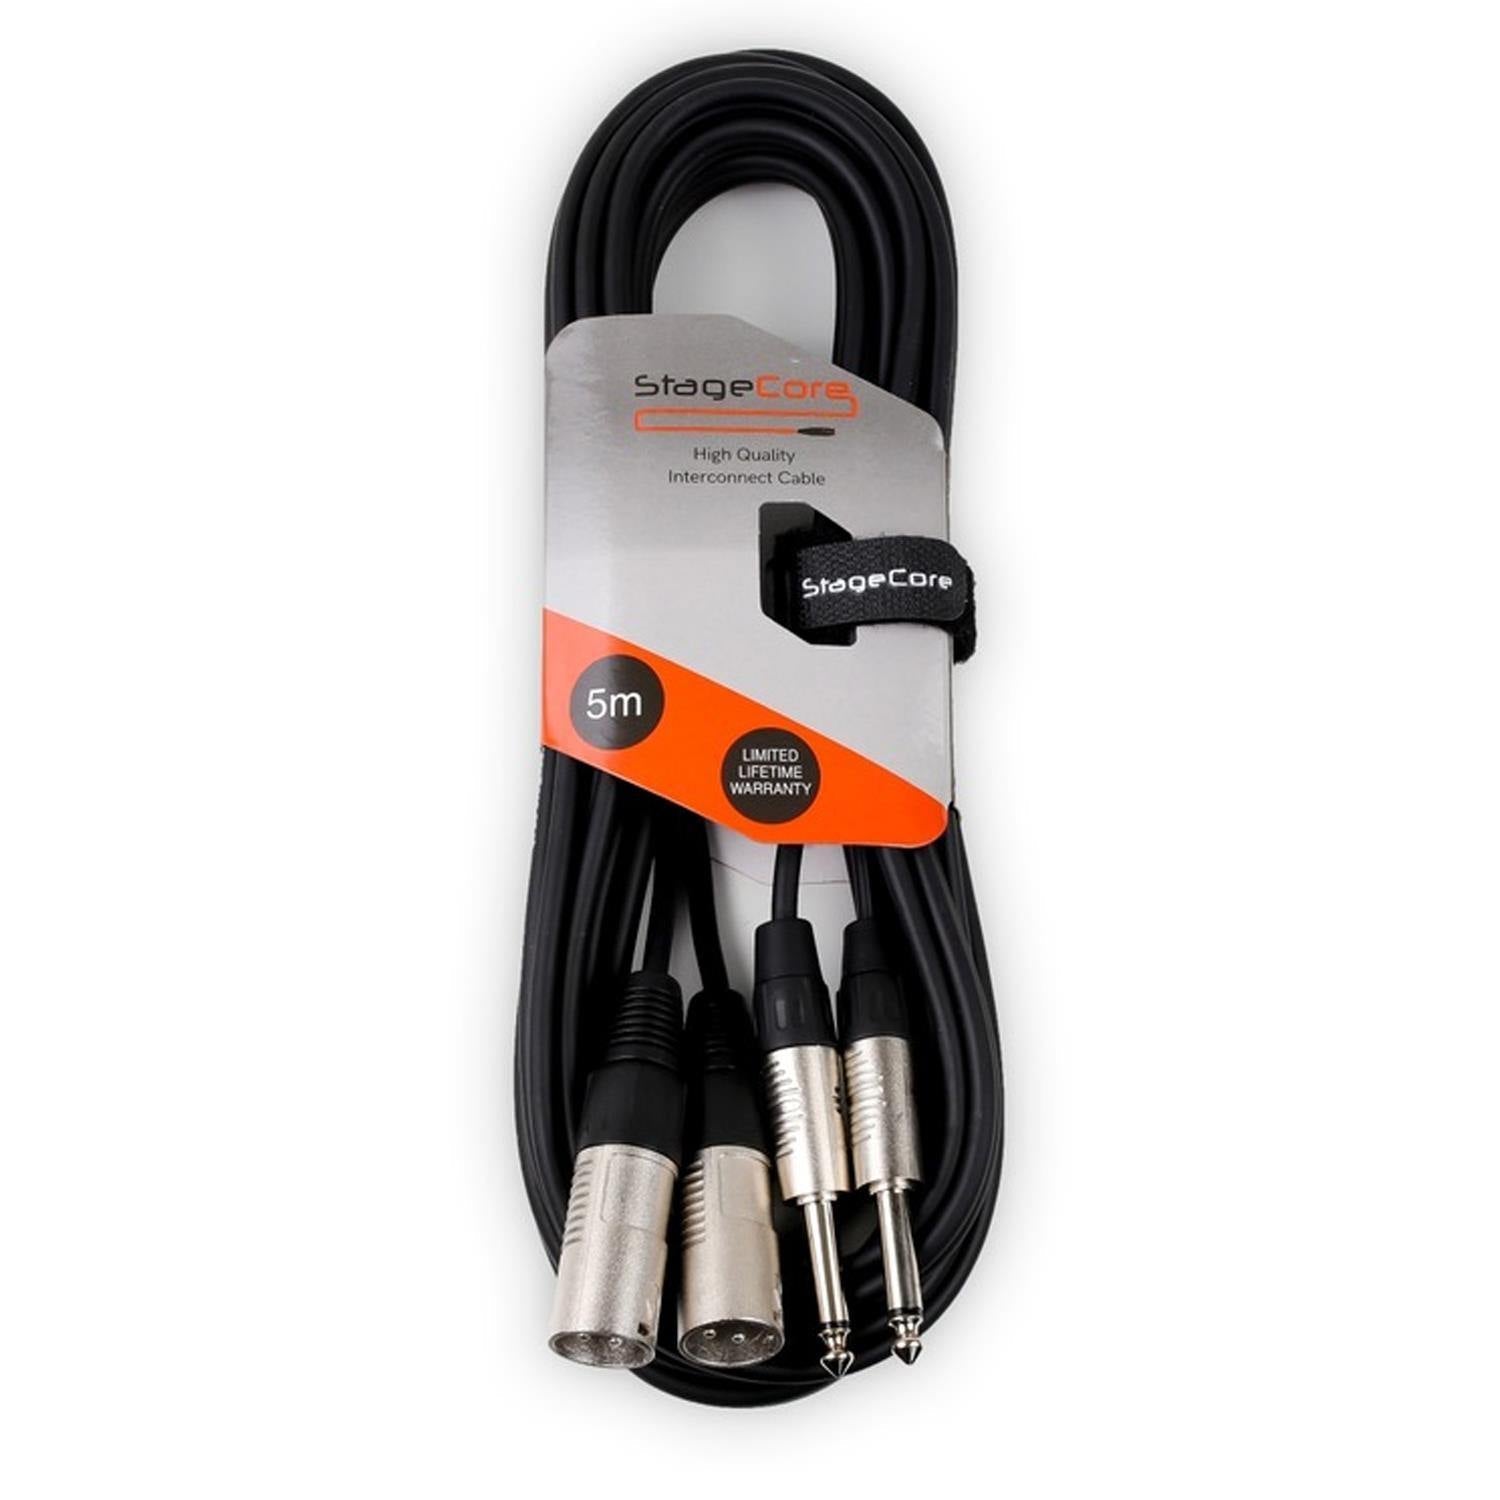 StageCore Twin Jack to XLR Male Cable 5m - DY Pro Audio